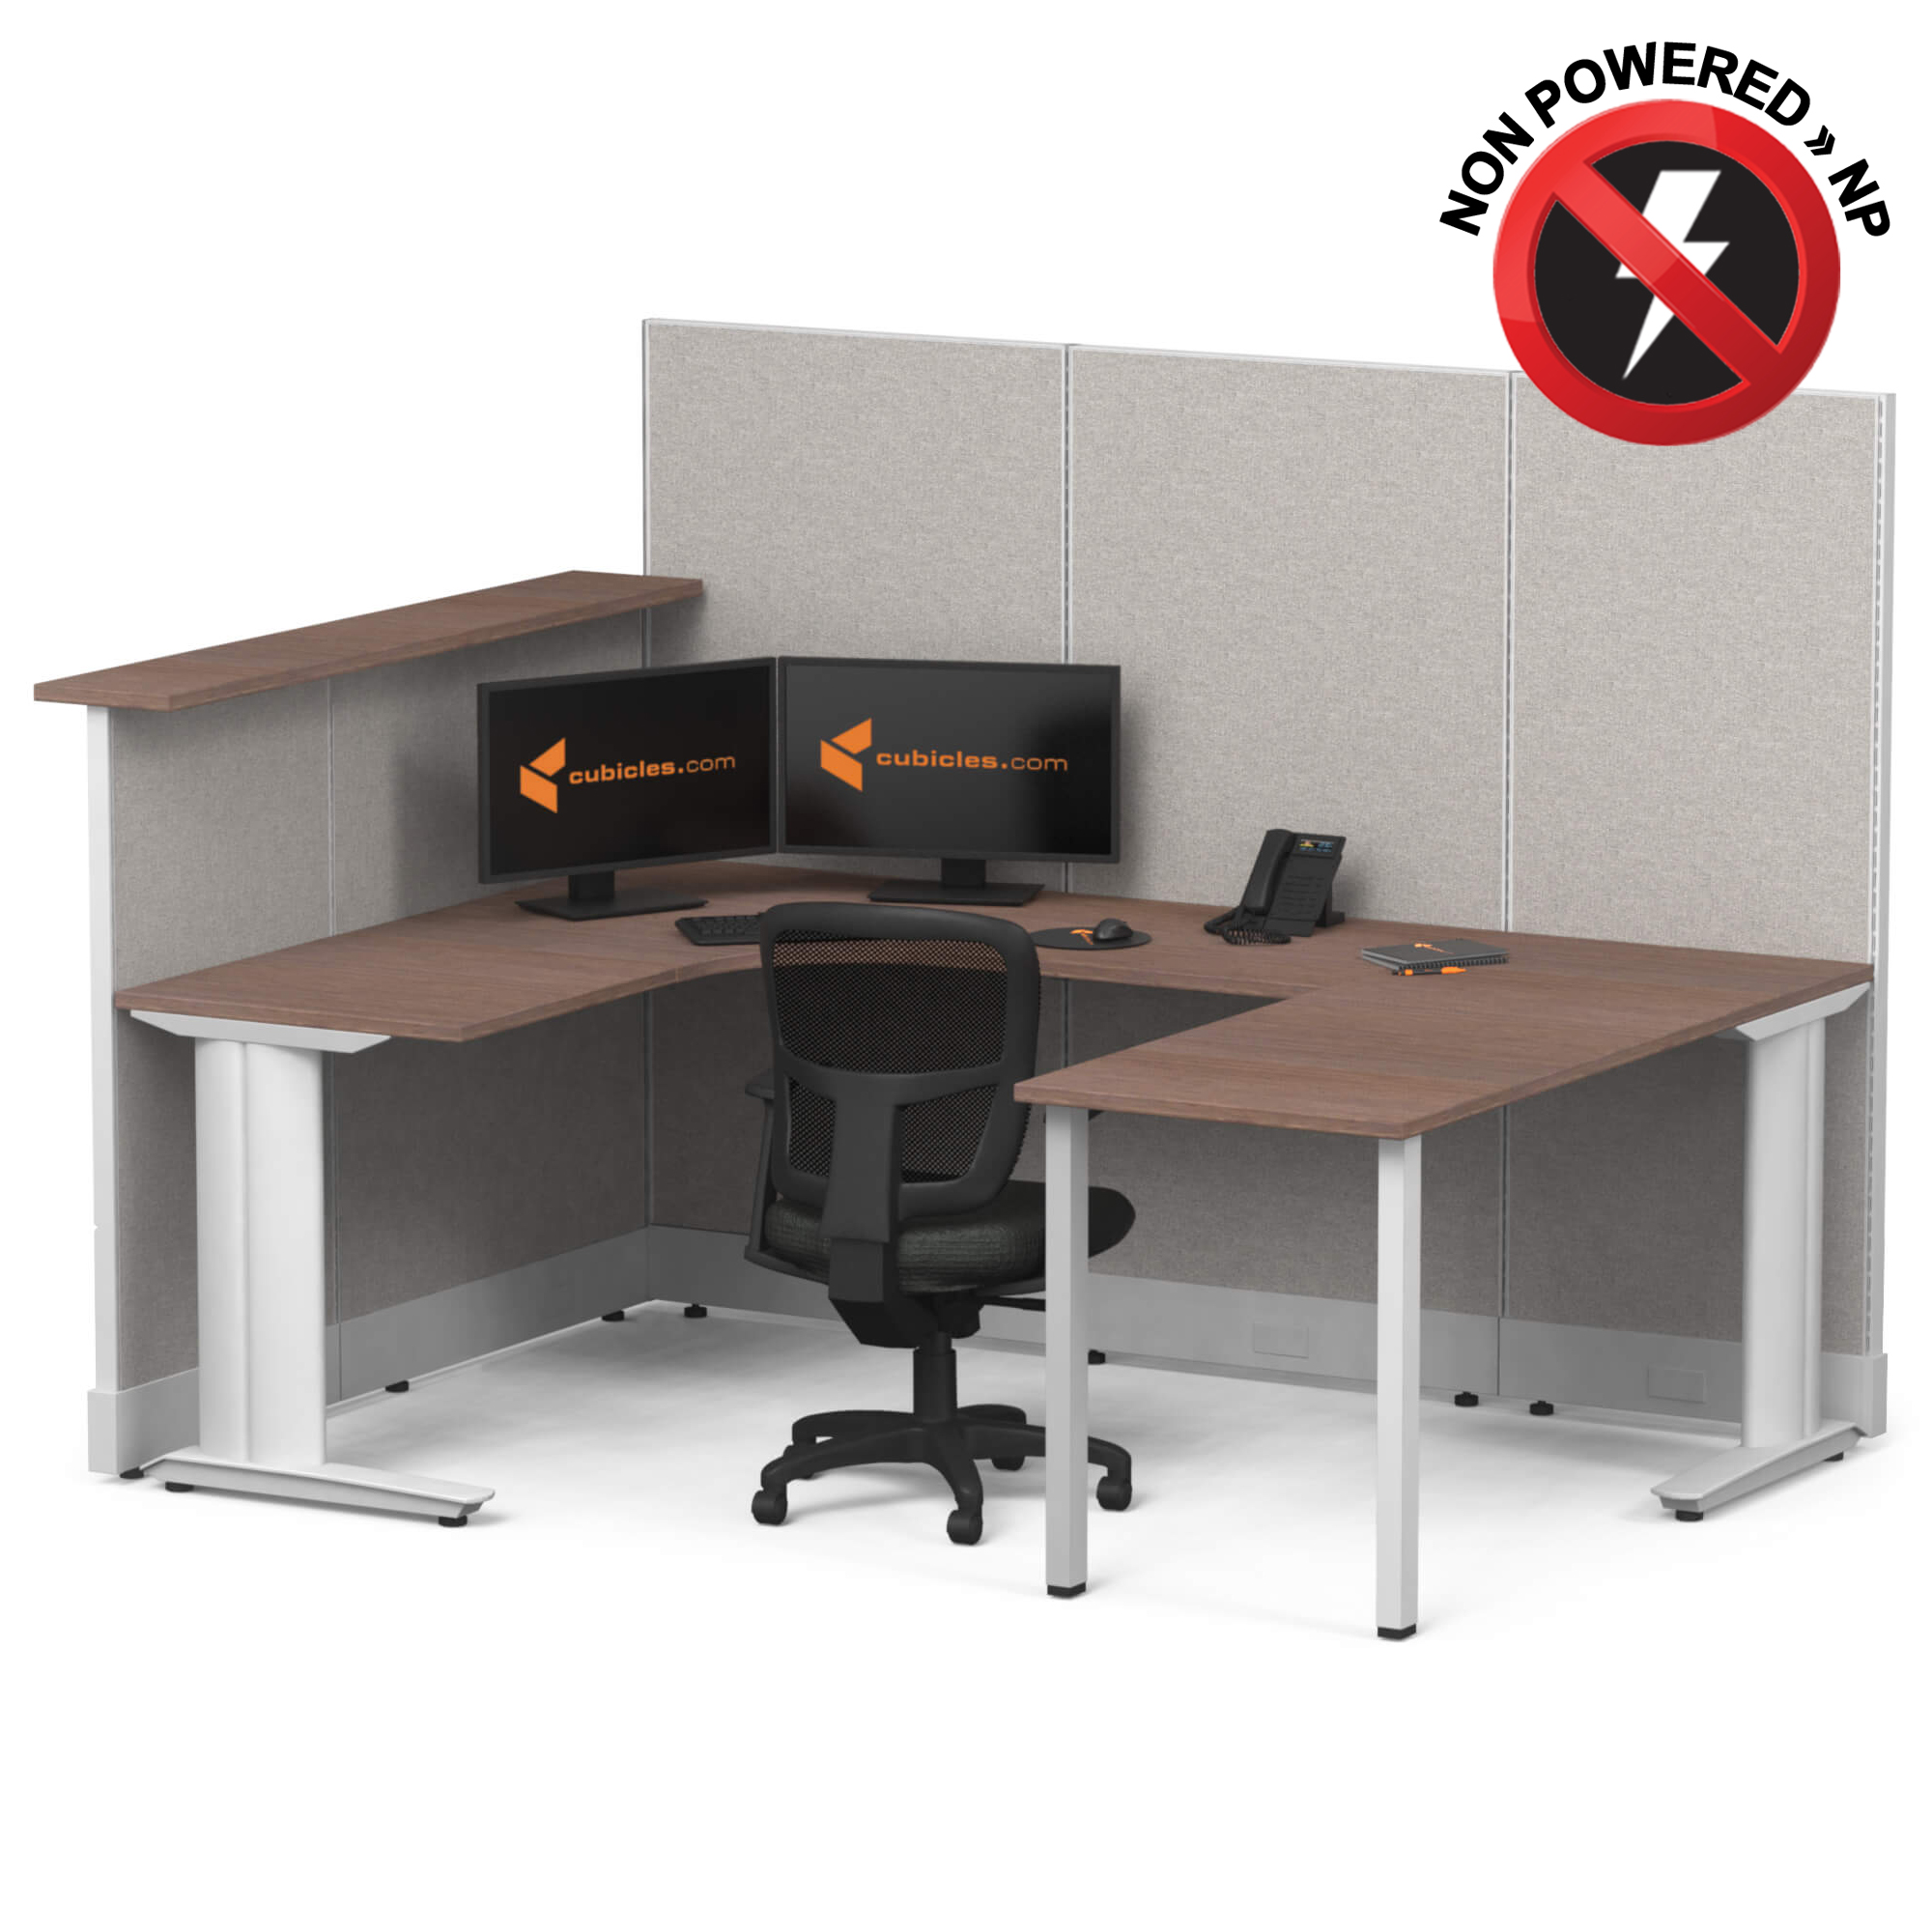 Cubicle desk u shaped workstation non powered with transaction top sign